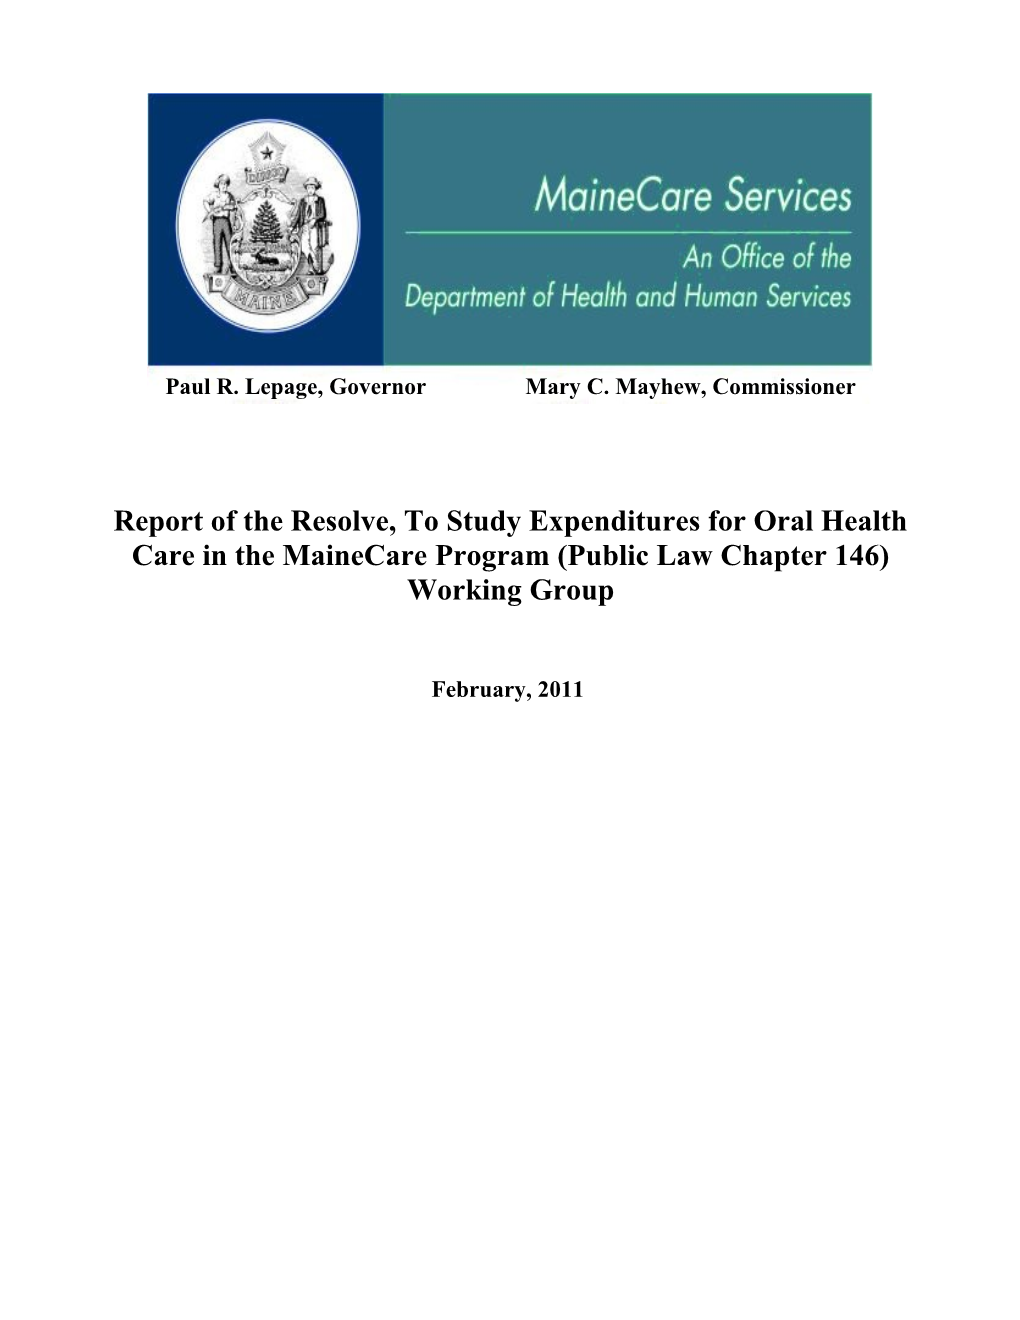 Report of the Resolve, to Study Expenditures for Oral Health Care in the Mainecare Program